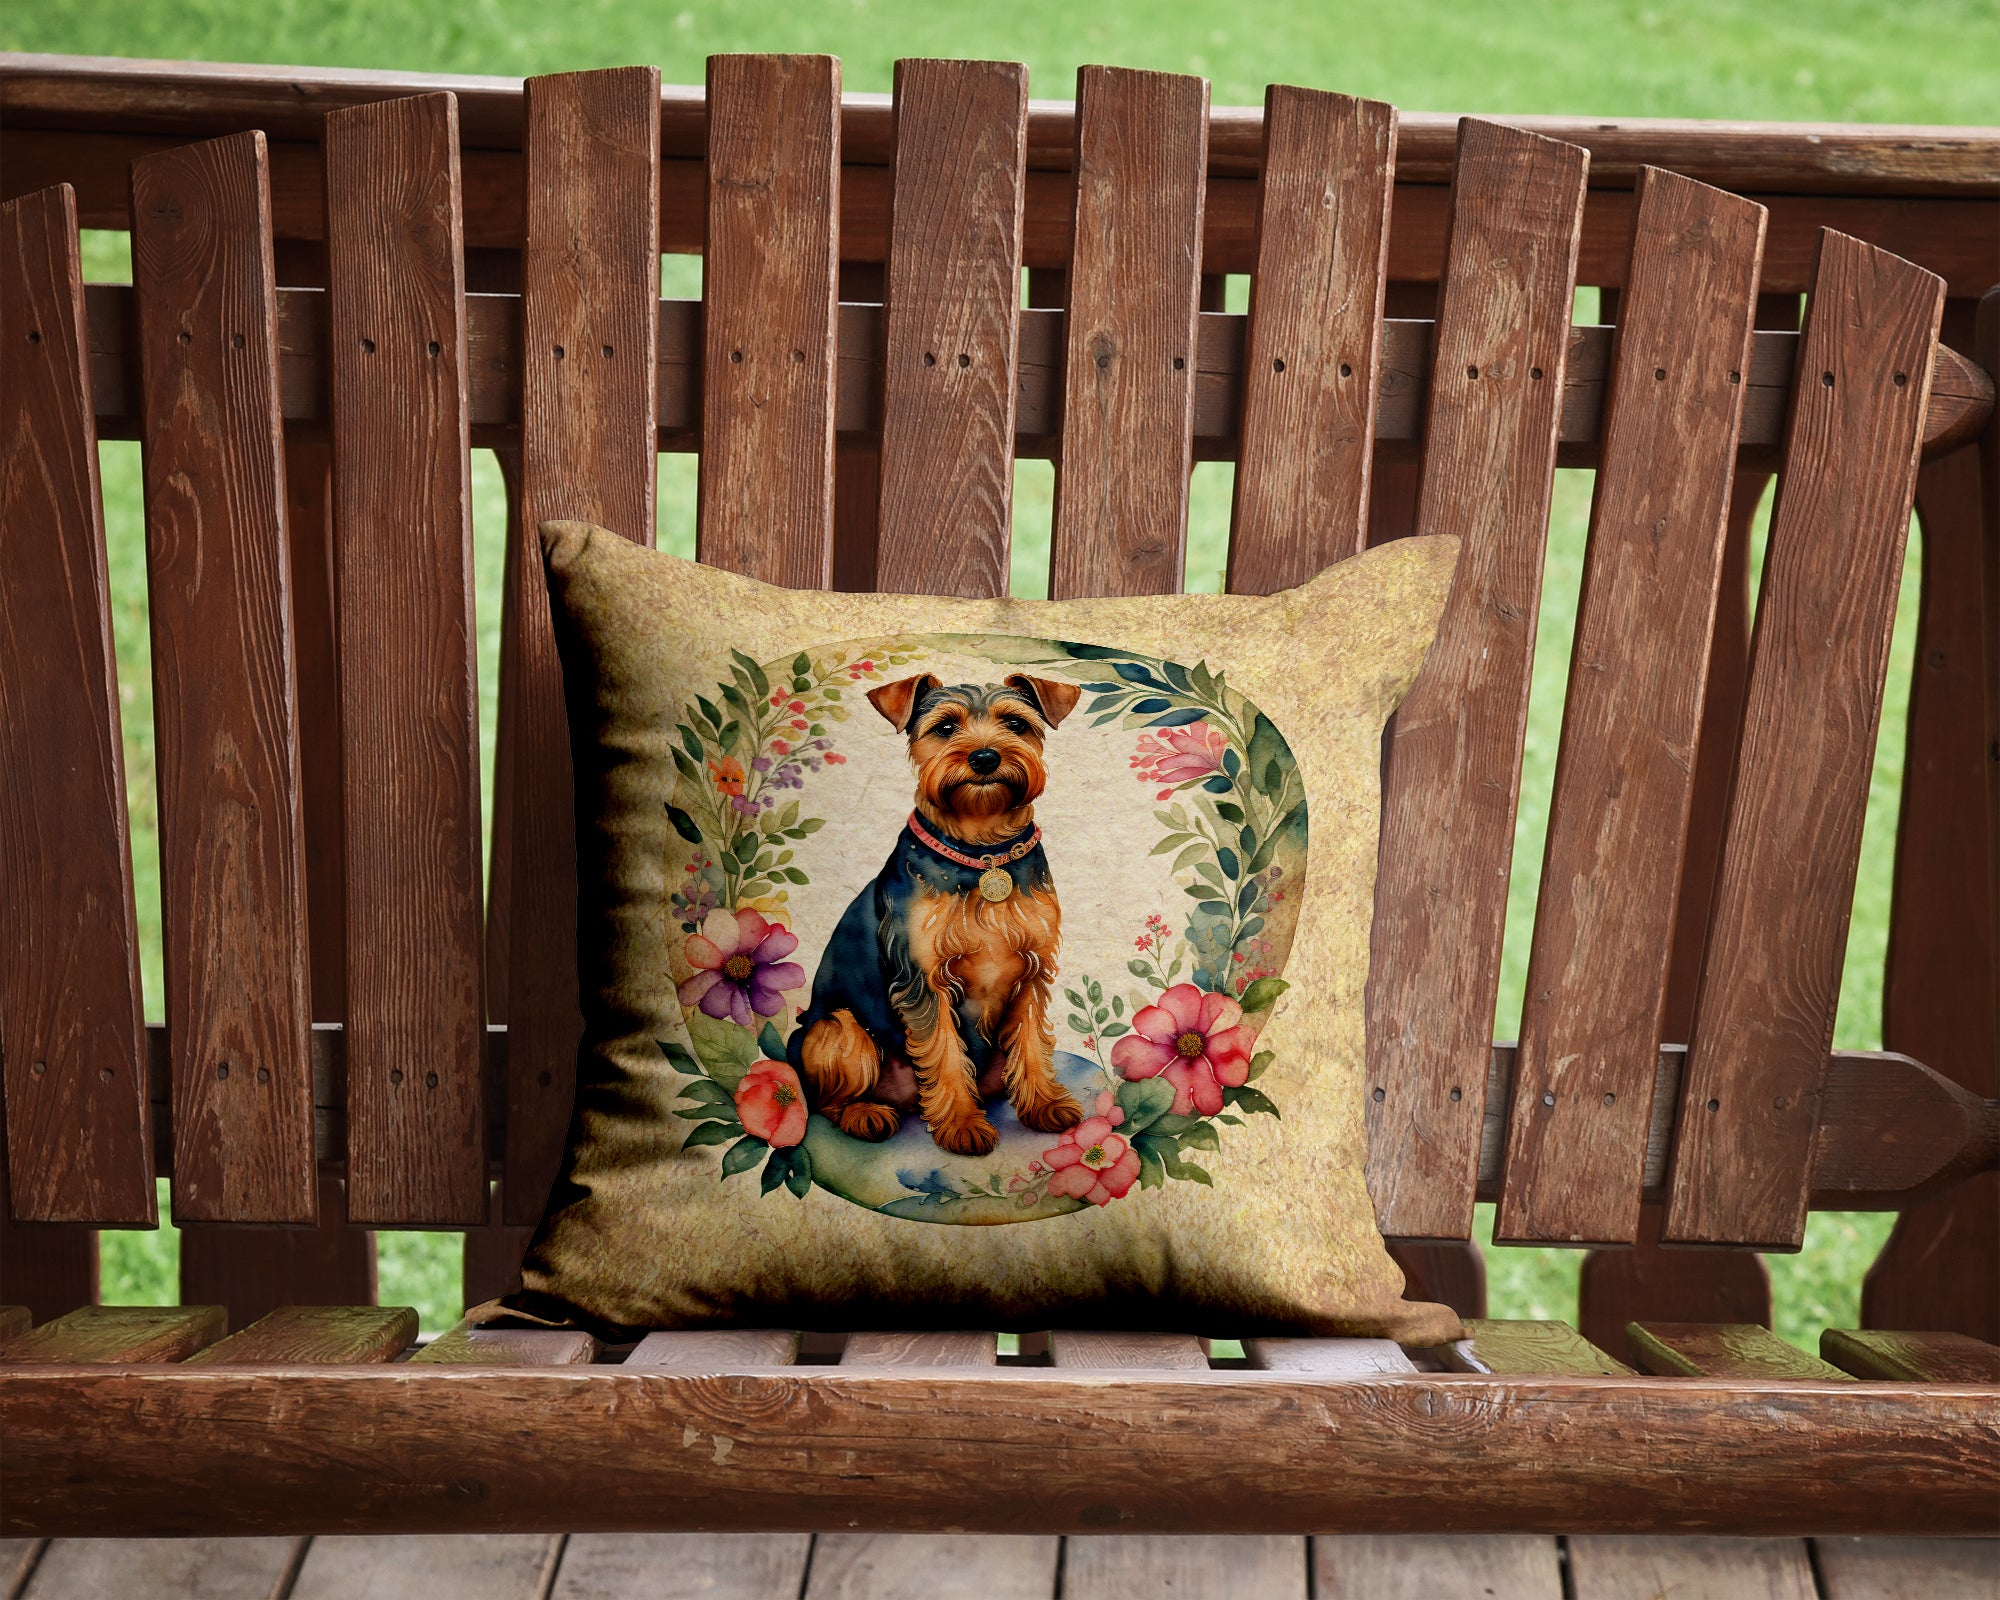 Welsh Terrier and Flowers Fabric Decorative Pillow